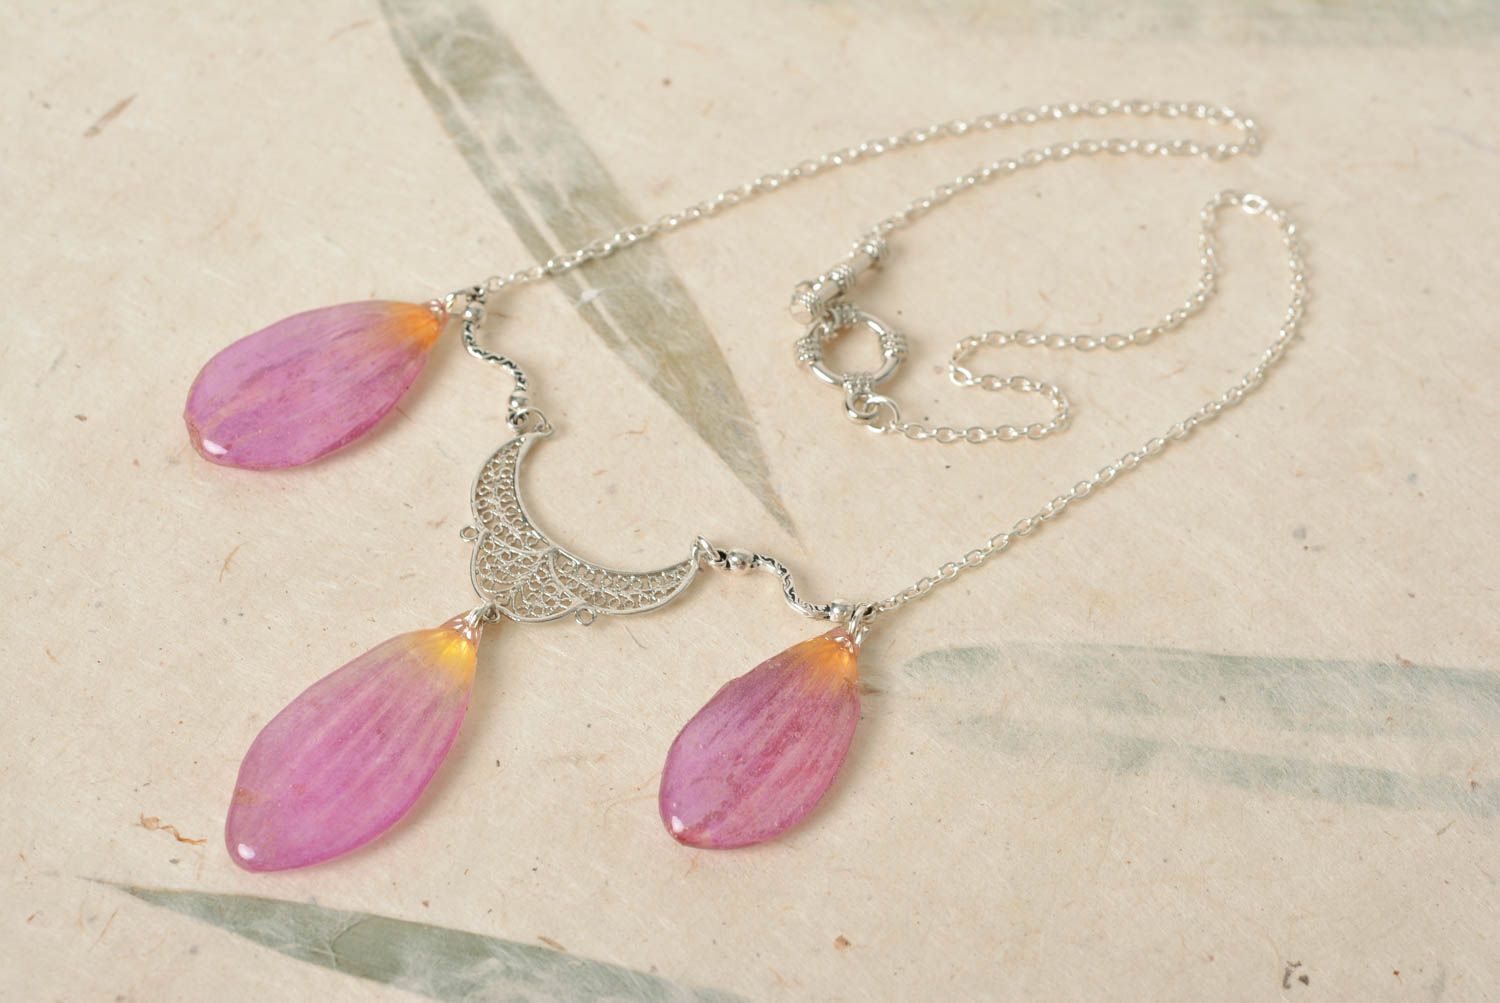 Necklace with epoxy resin with lilac petals pretty unusual handmade accessory photo 2